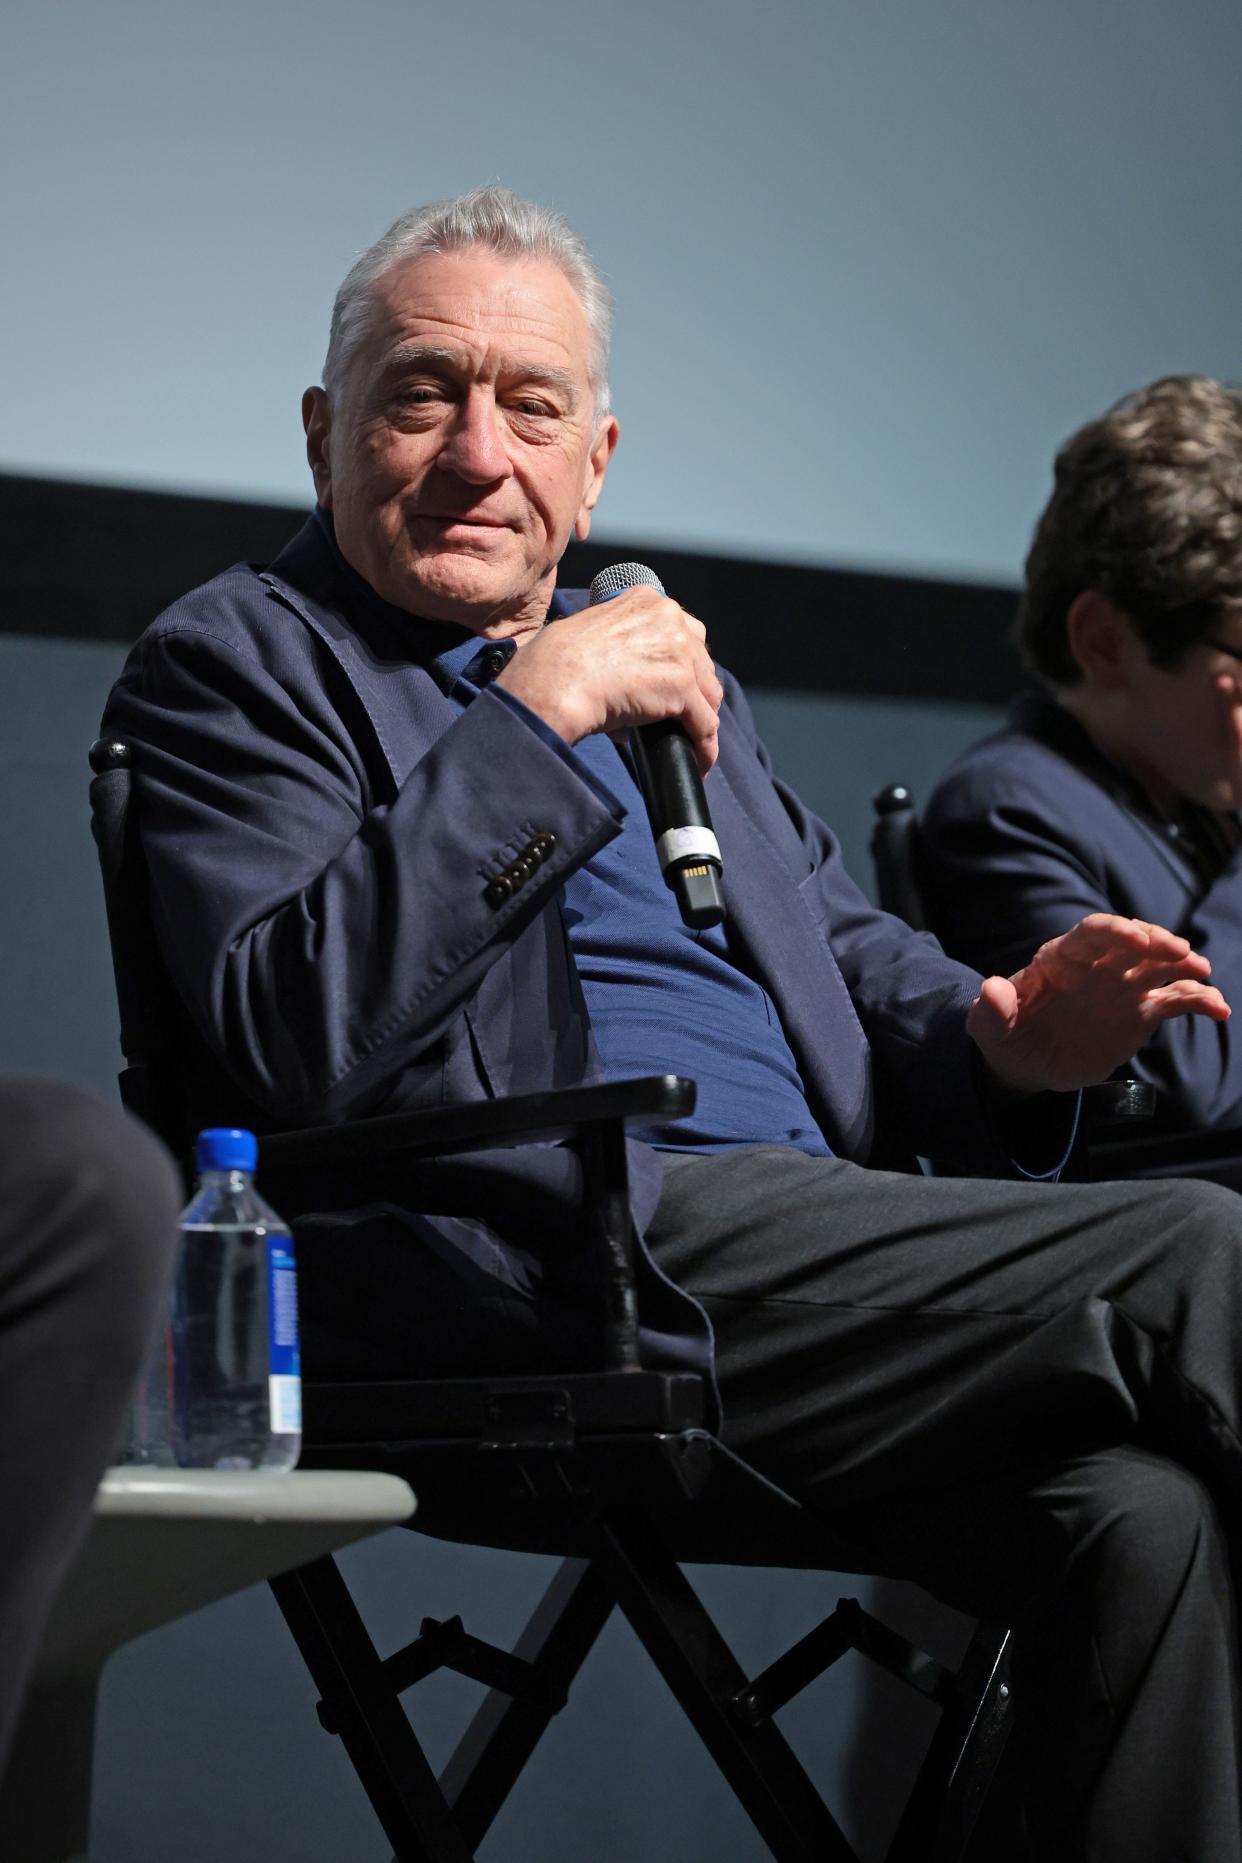 Robert De Niro has been accused on social media of yelling at anti-Israel protesters while filming scenes for an upcoming Netflix series.